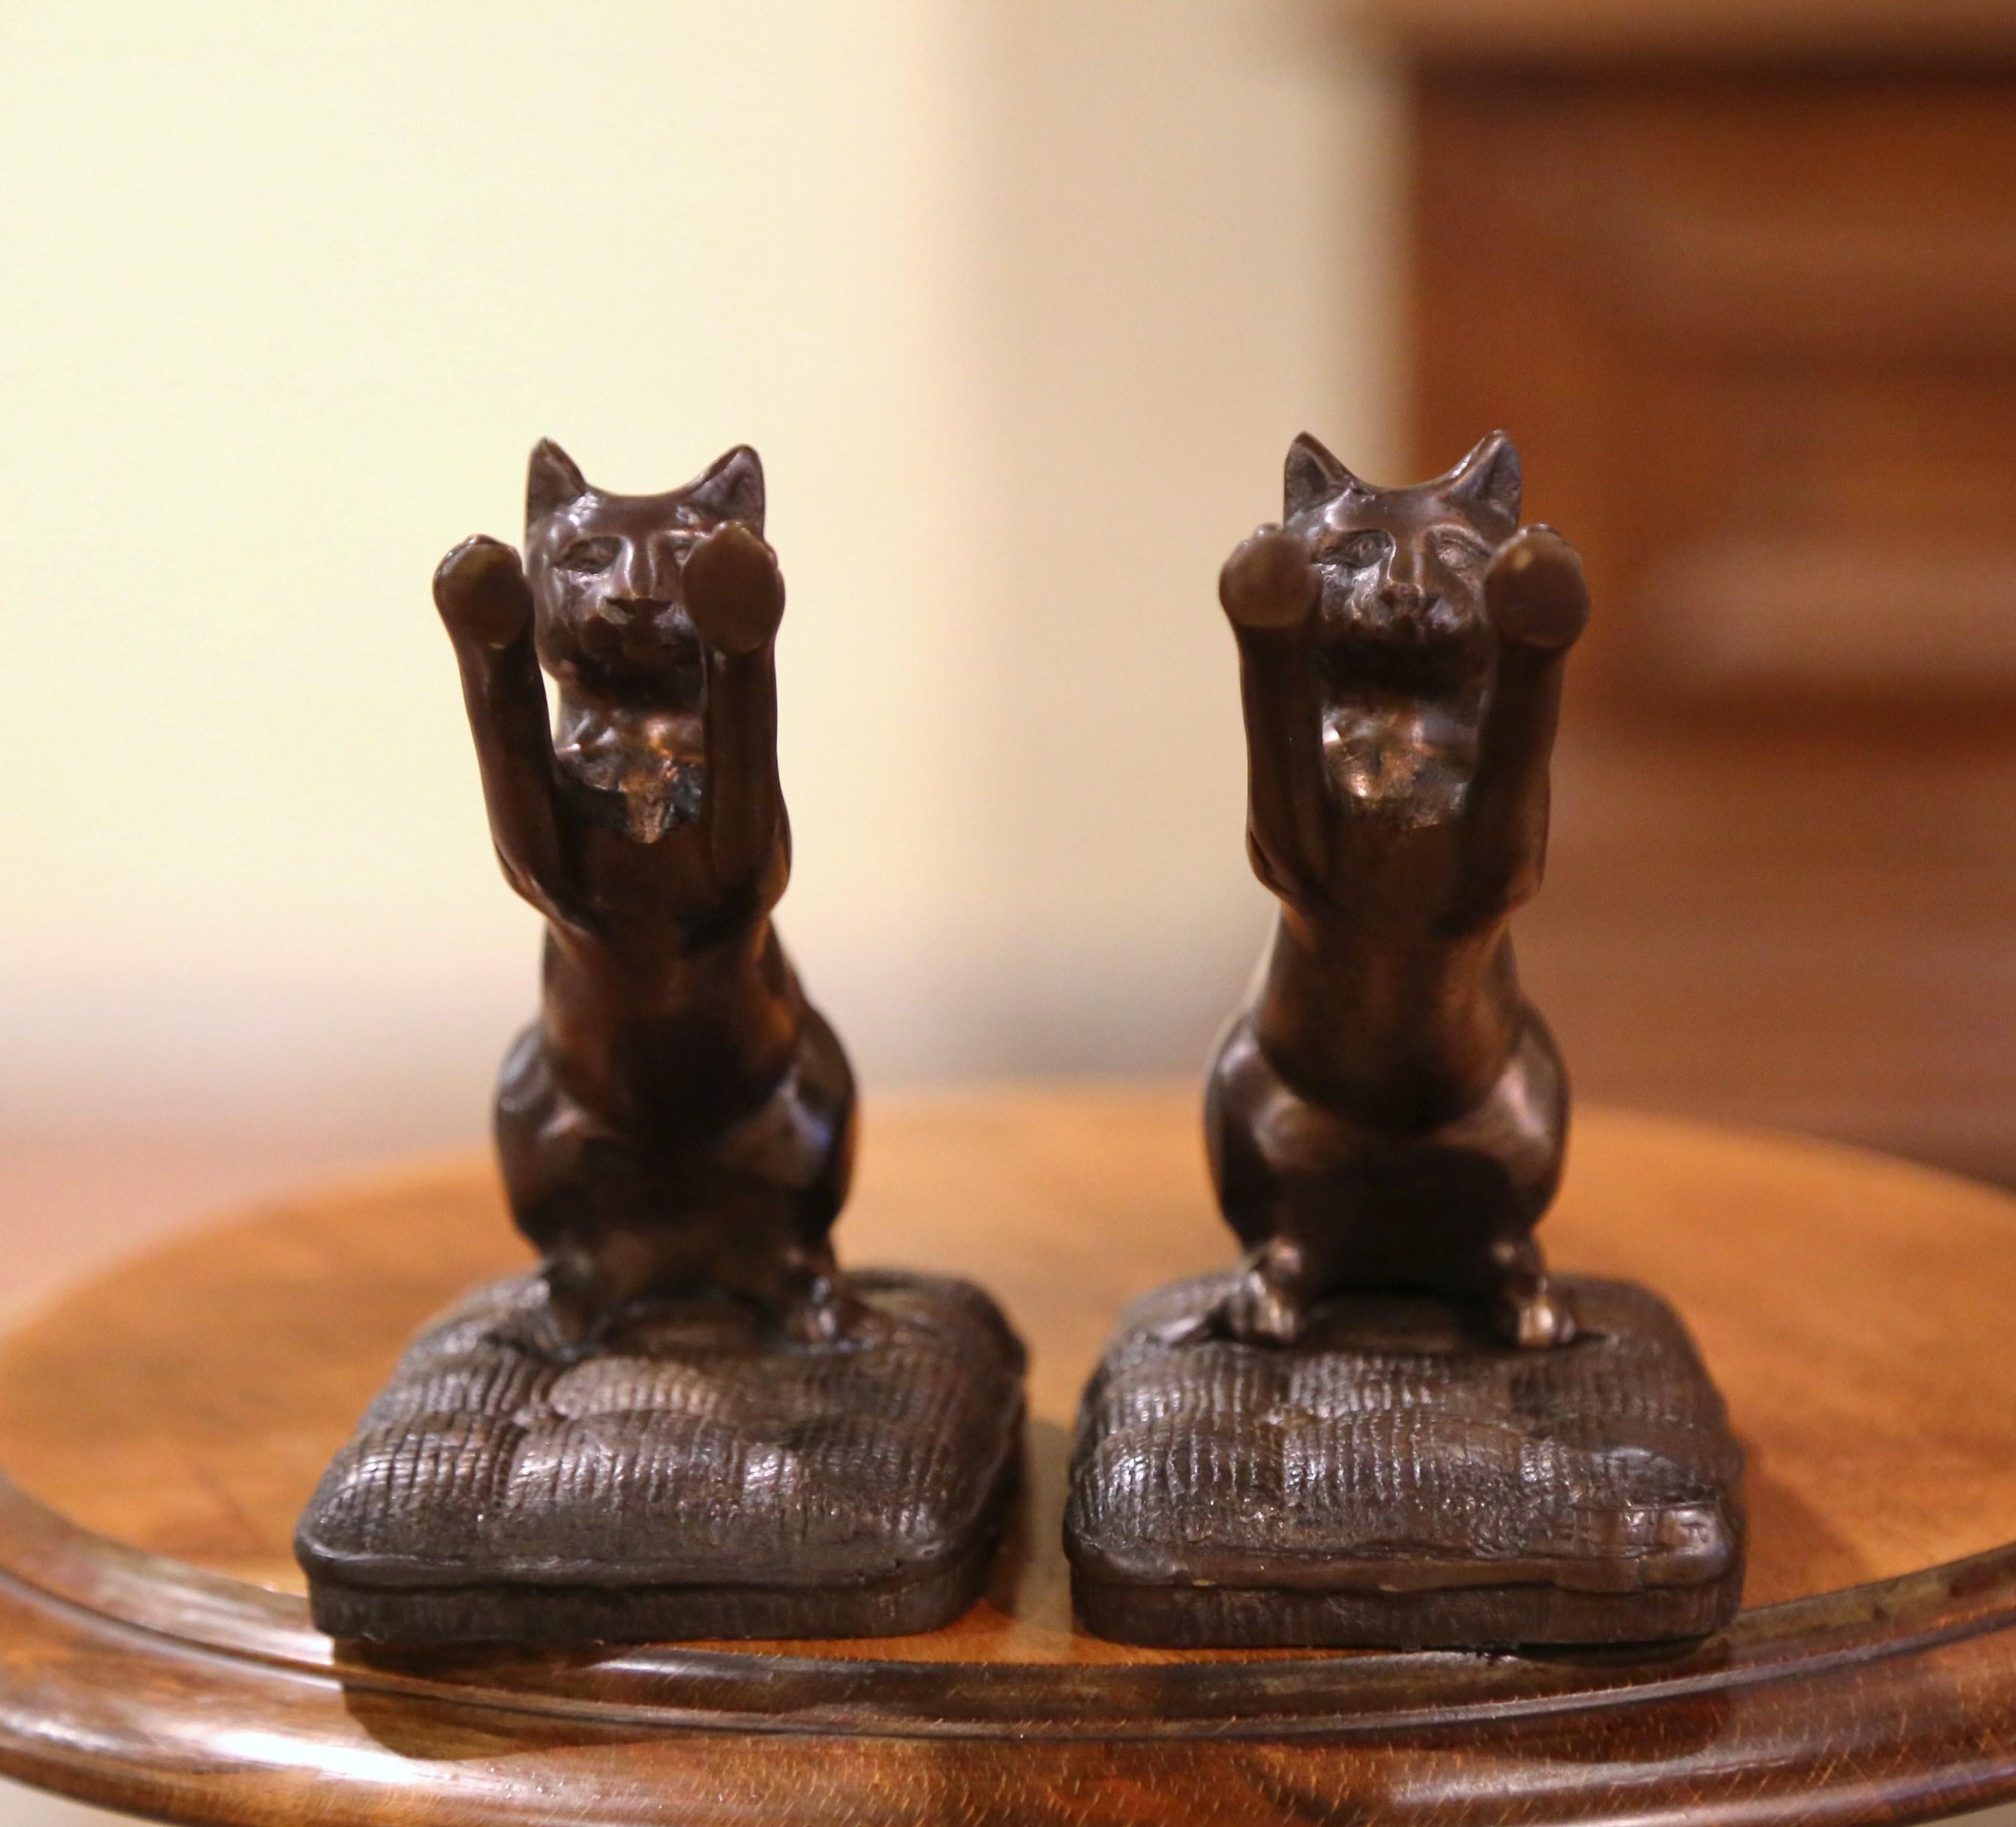 Keep your books aligned on a shelf with this exquisite pair of kitty sculpture bookends. Crafted in France, circa 1970, and built of bronze, these figurines feature a sleek and regal design, beautifully accentuated by a rich patinated bronze finish.